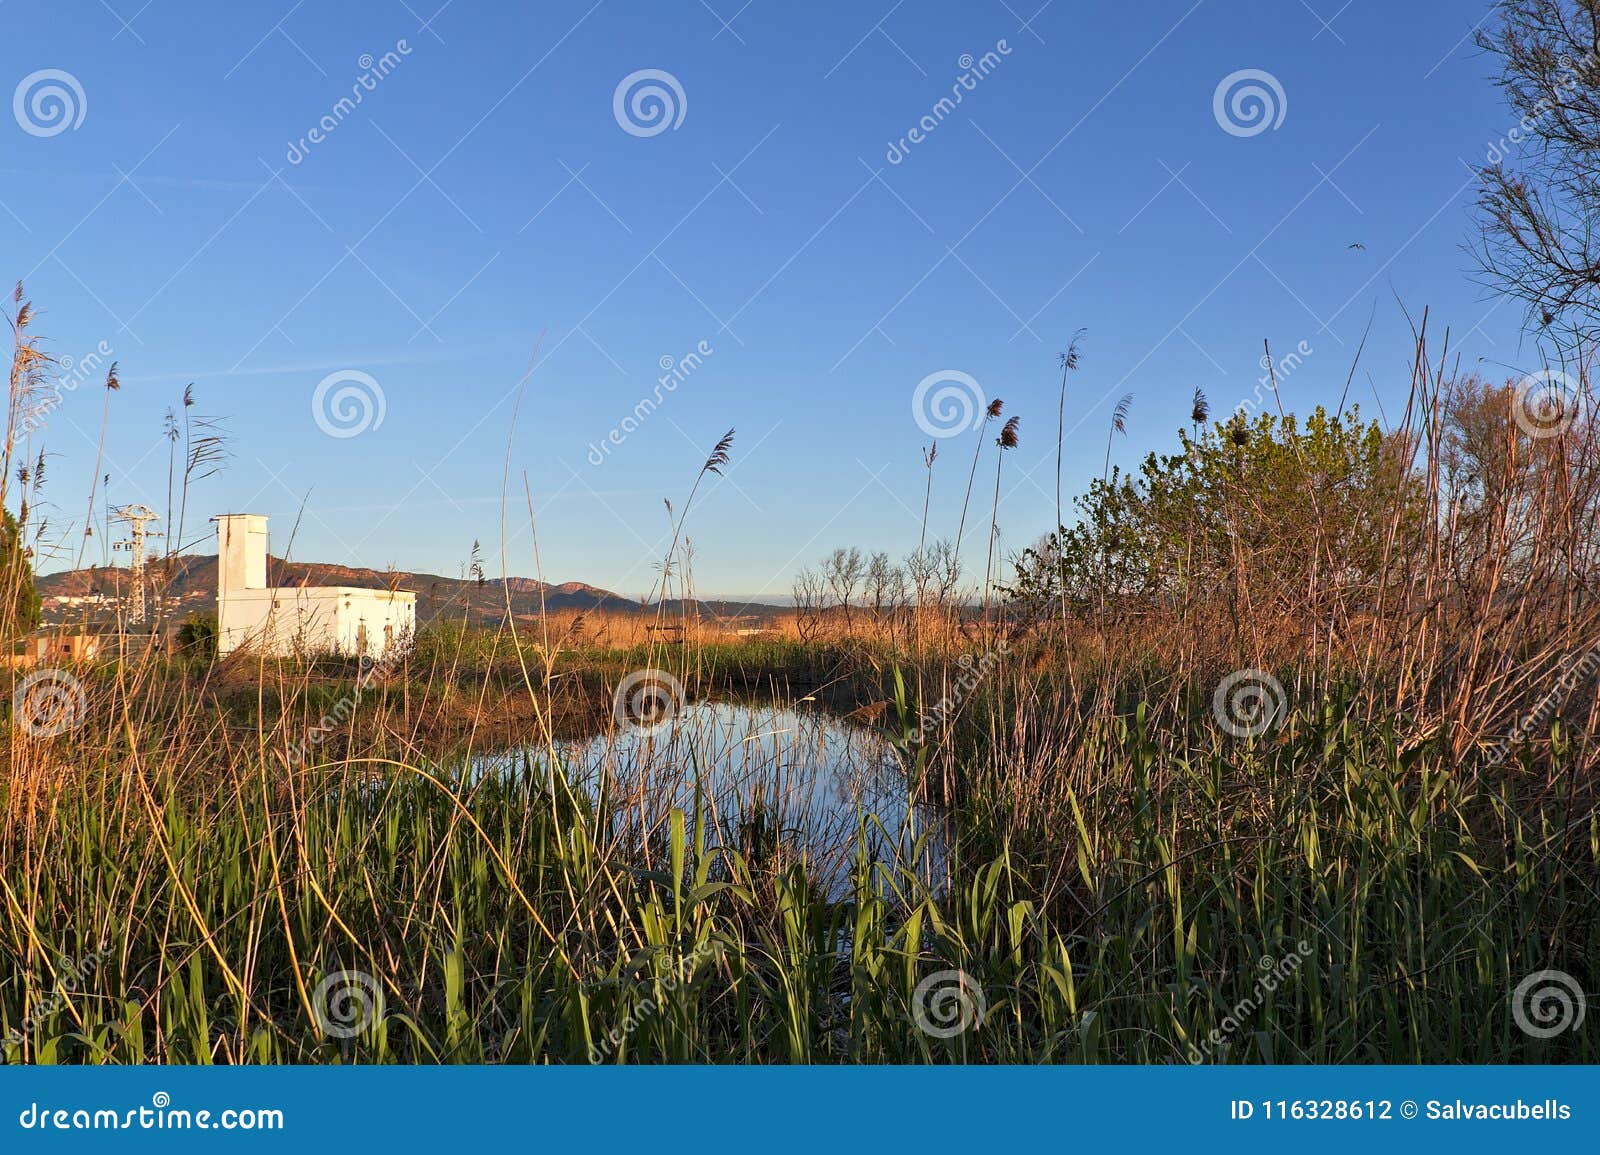 natural landscape of a small wetland